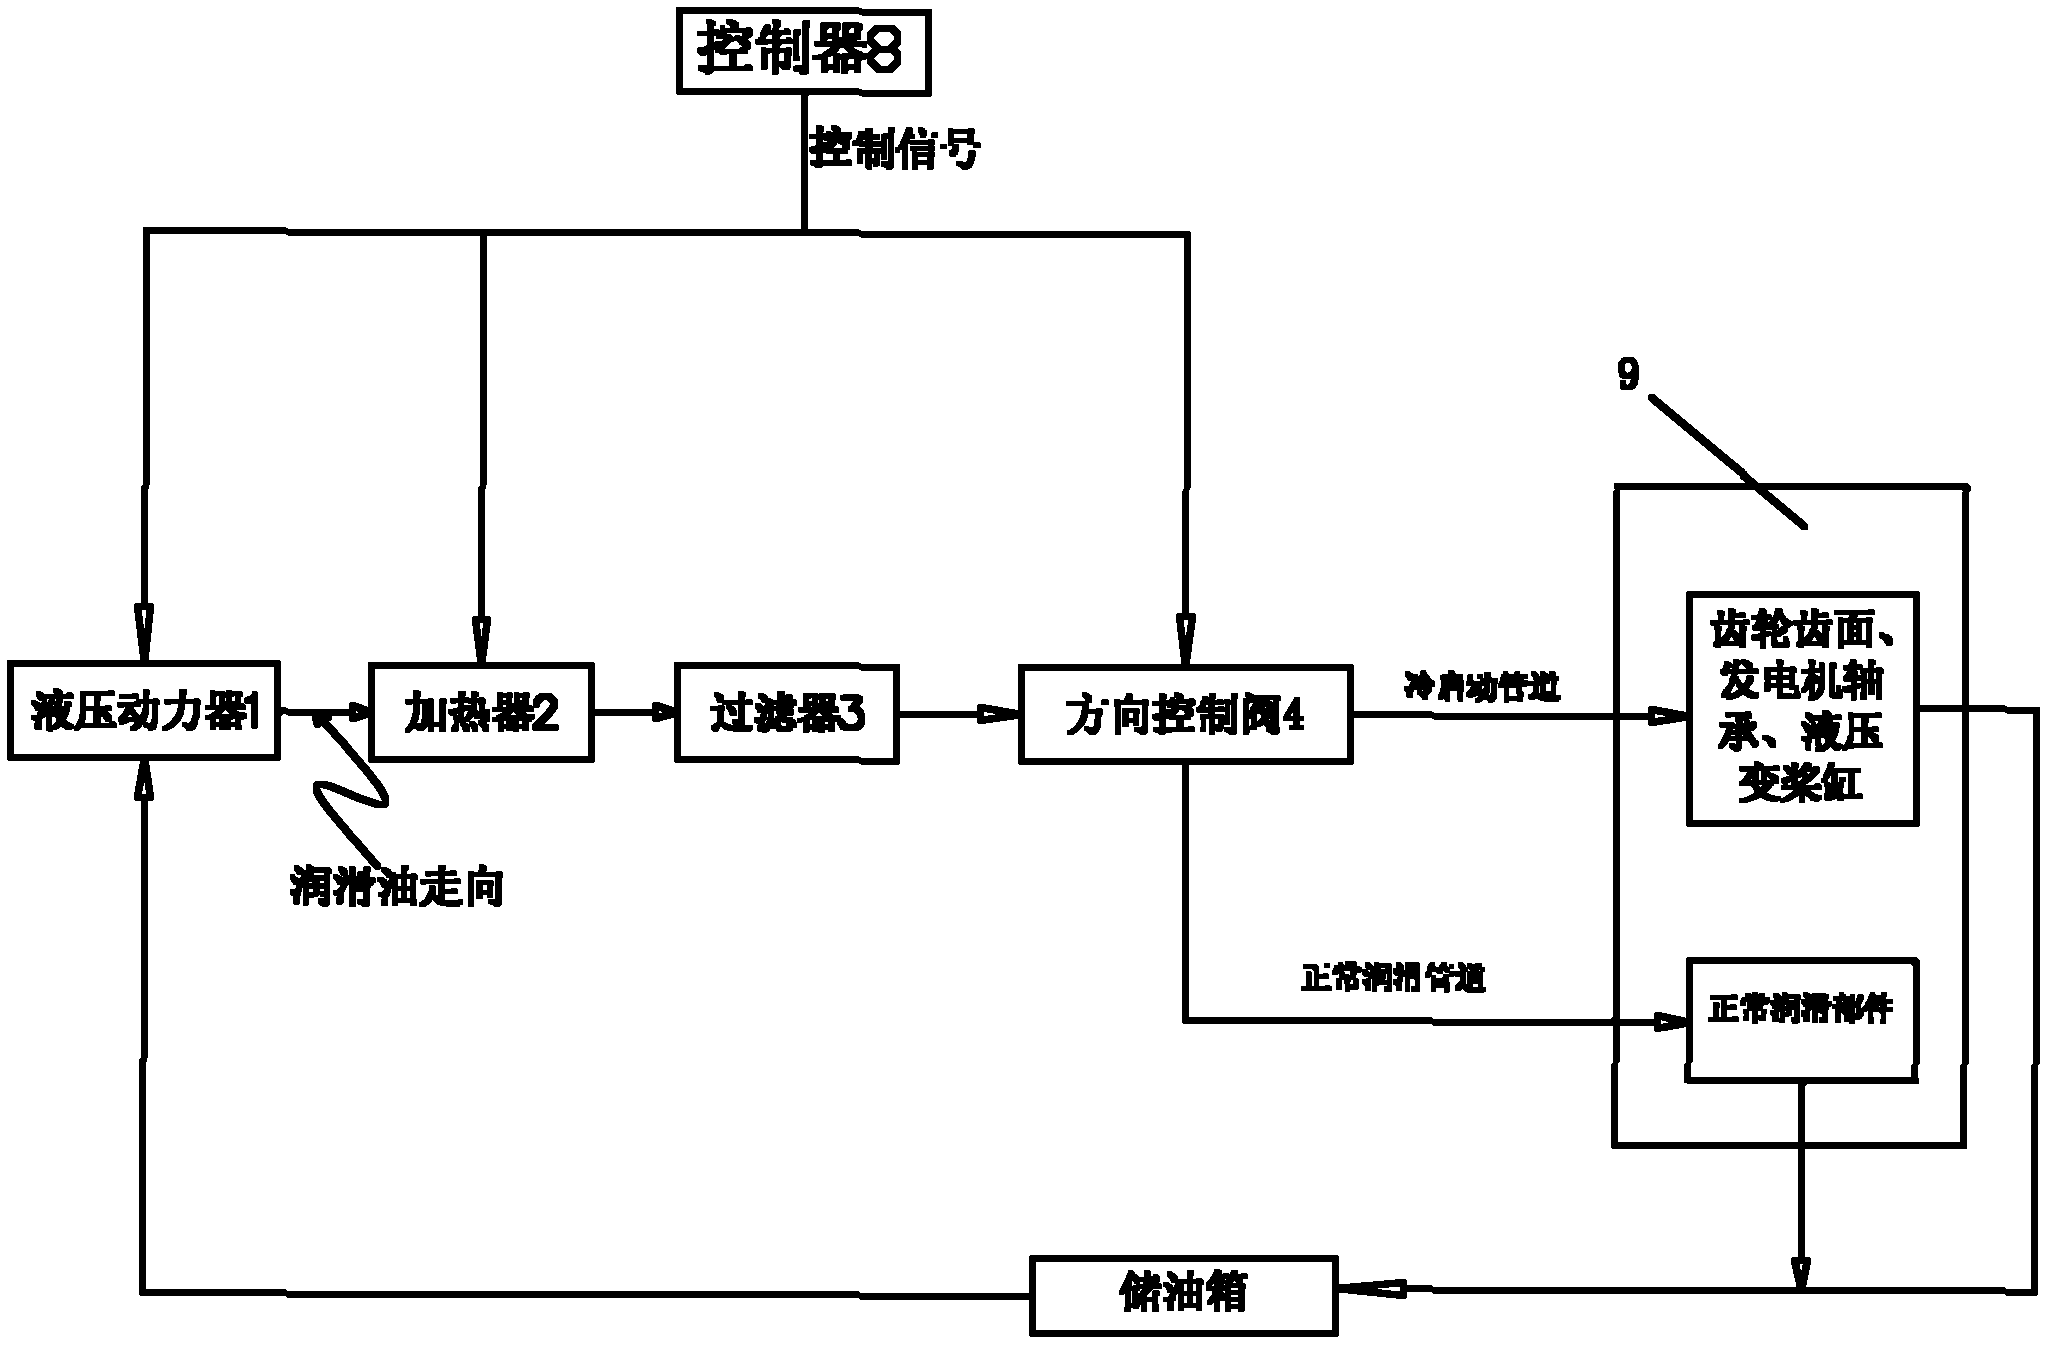 Cold starting system of wind generating set